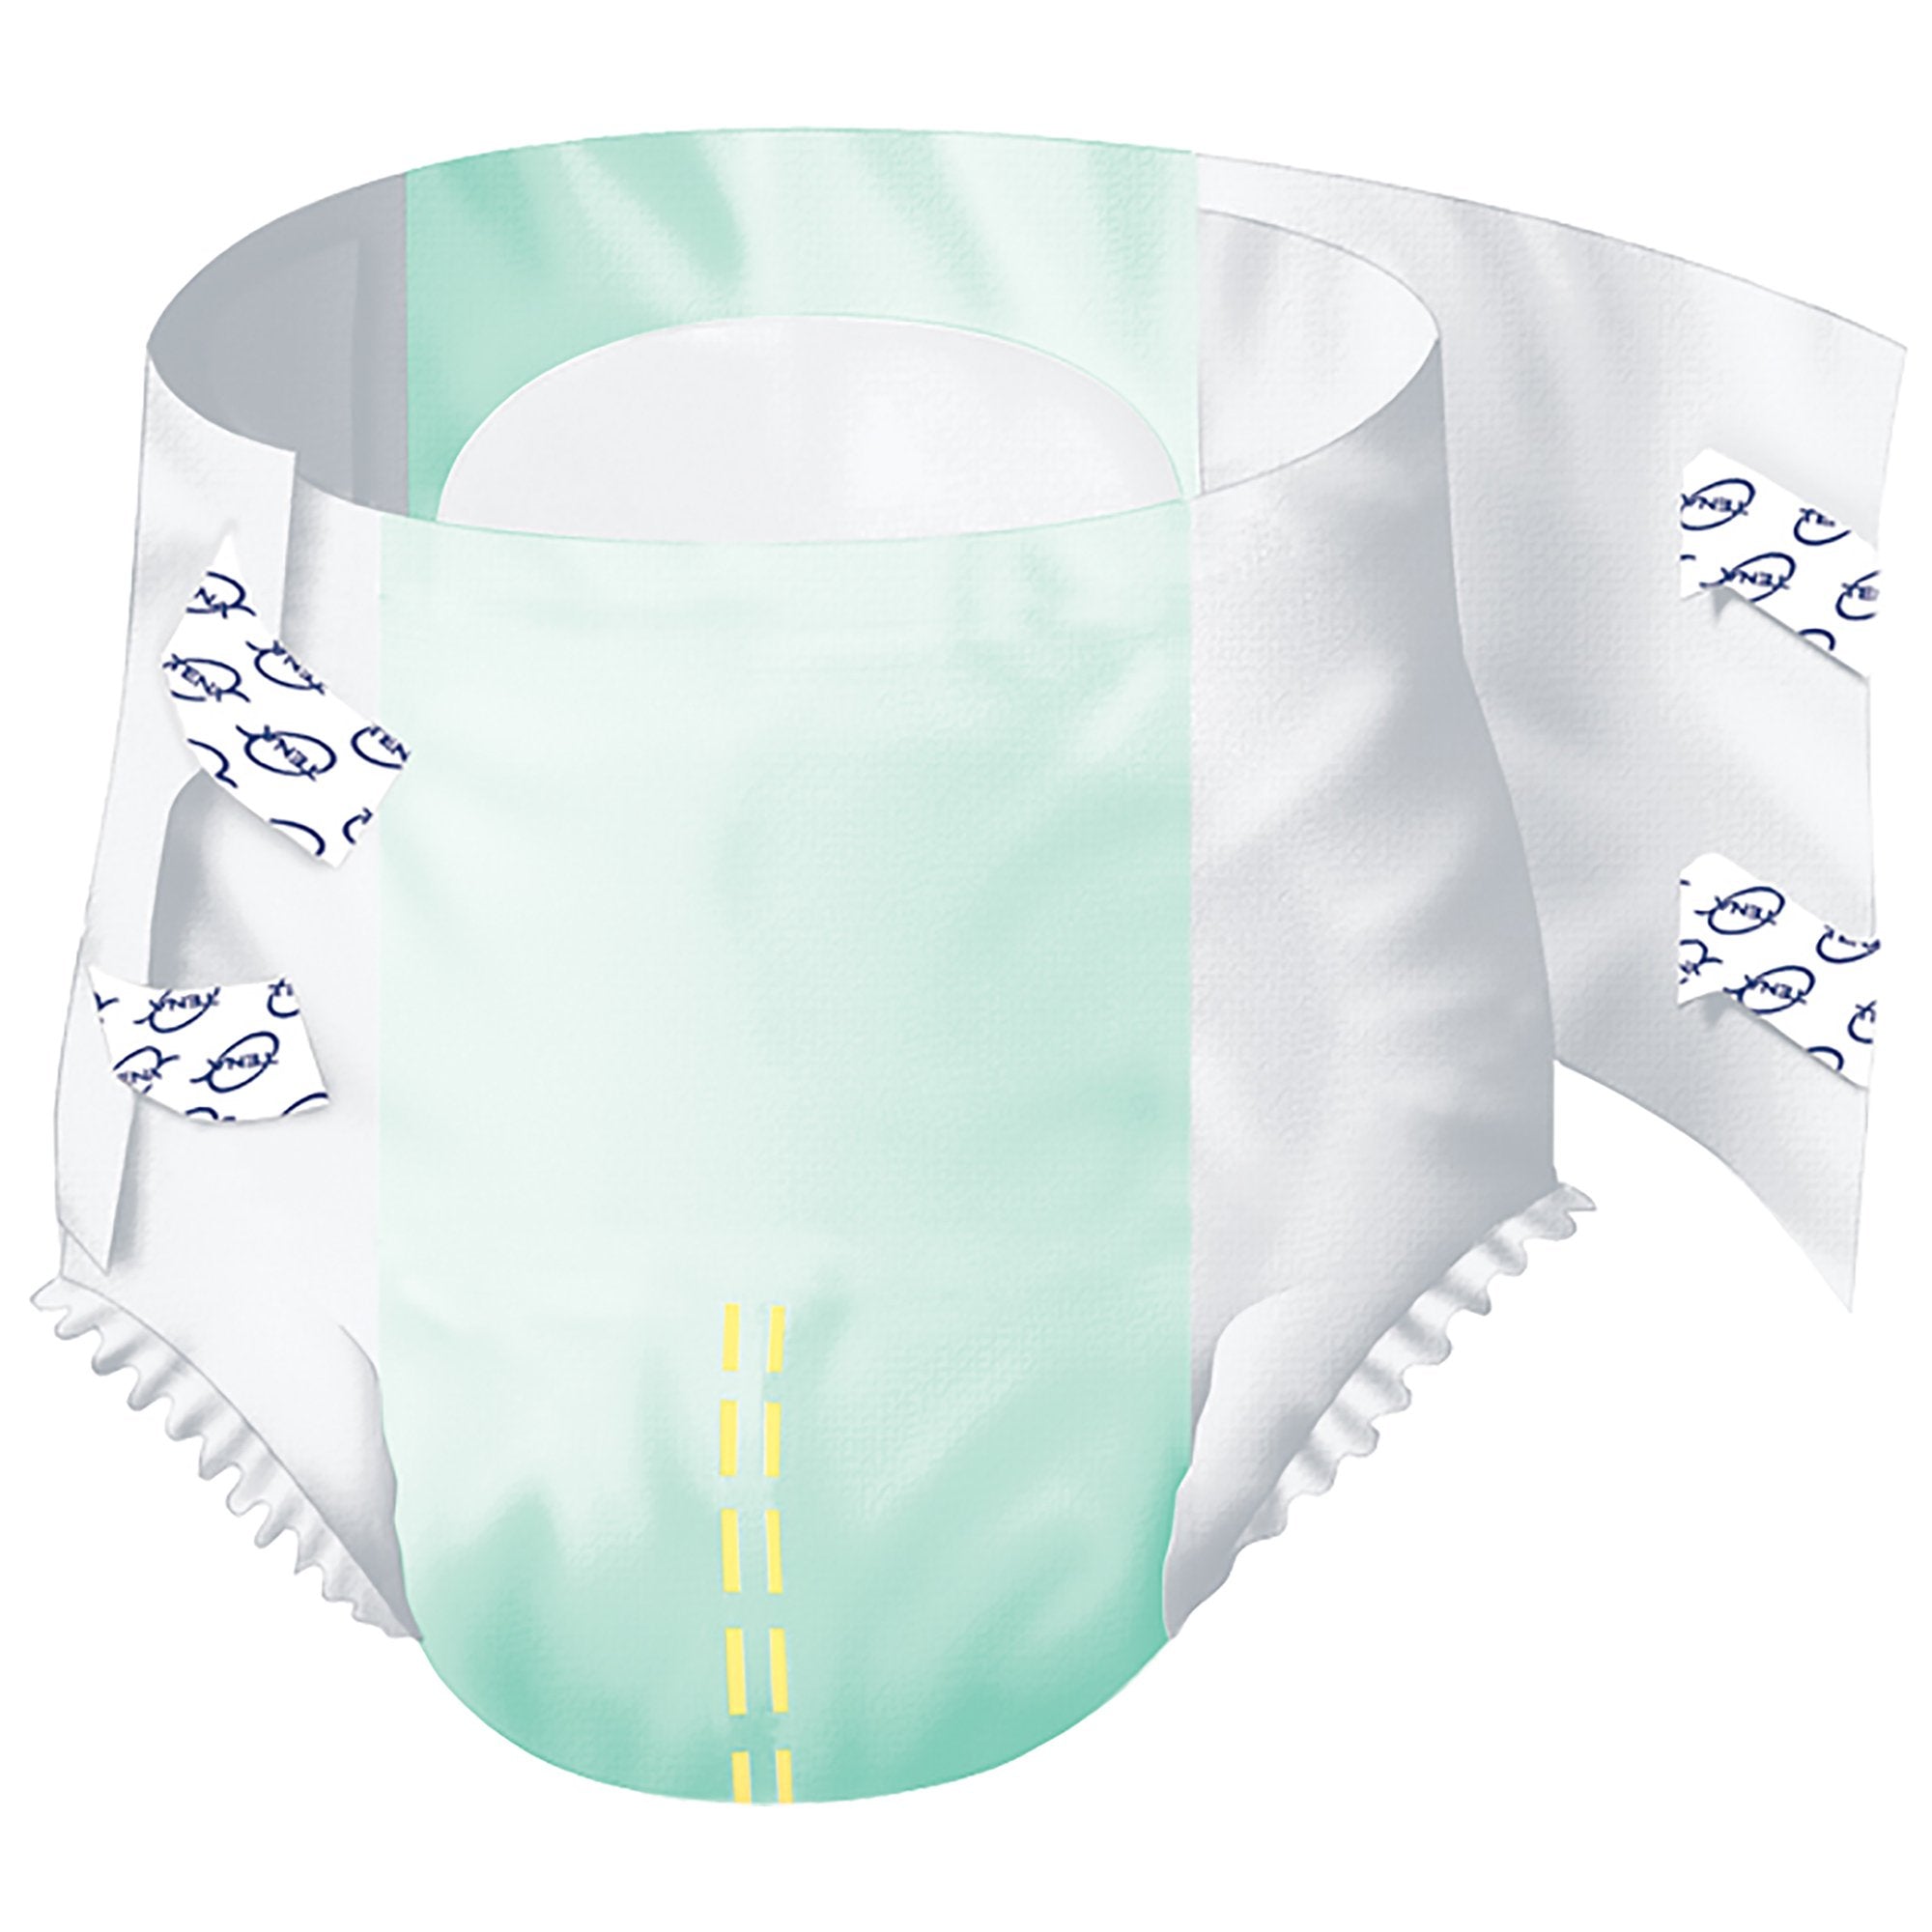 Unisex Adult Incontinence Brief TENA Small Brief Small Disposable Moderate Absorbency